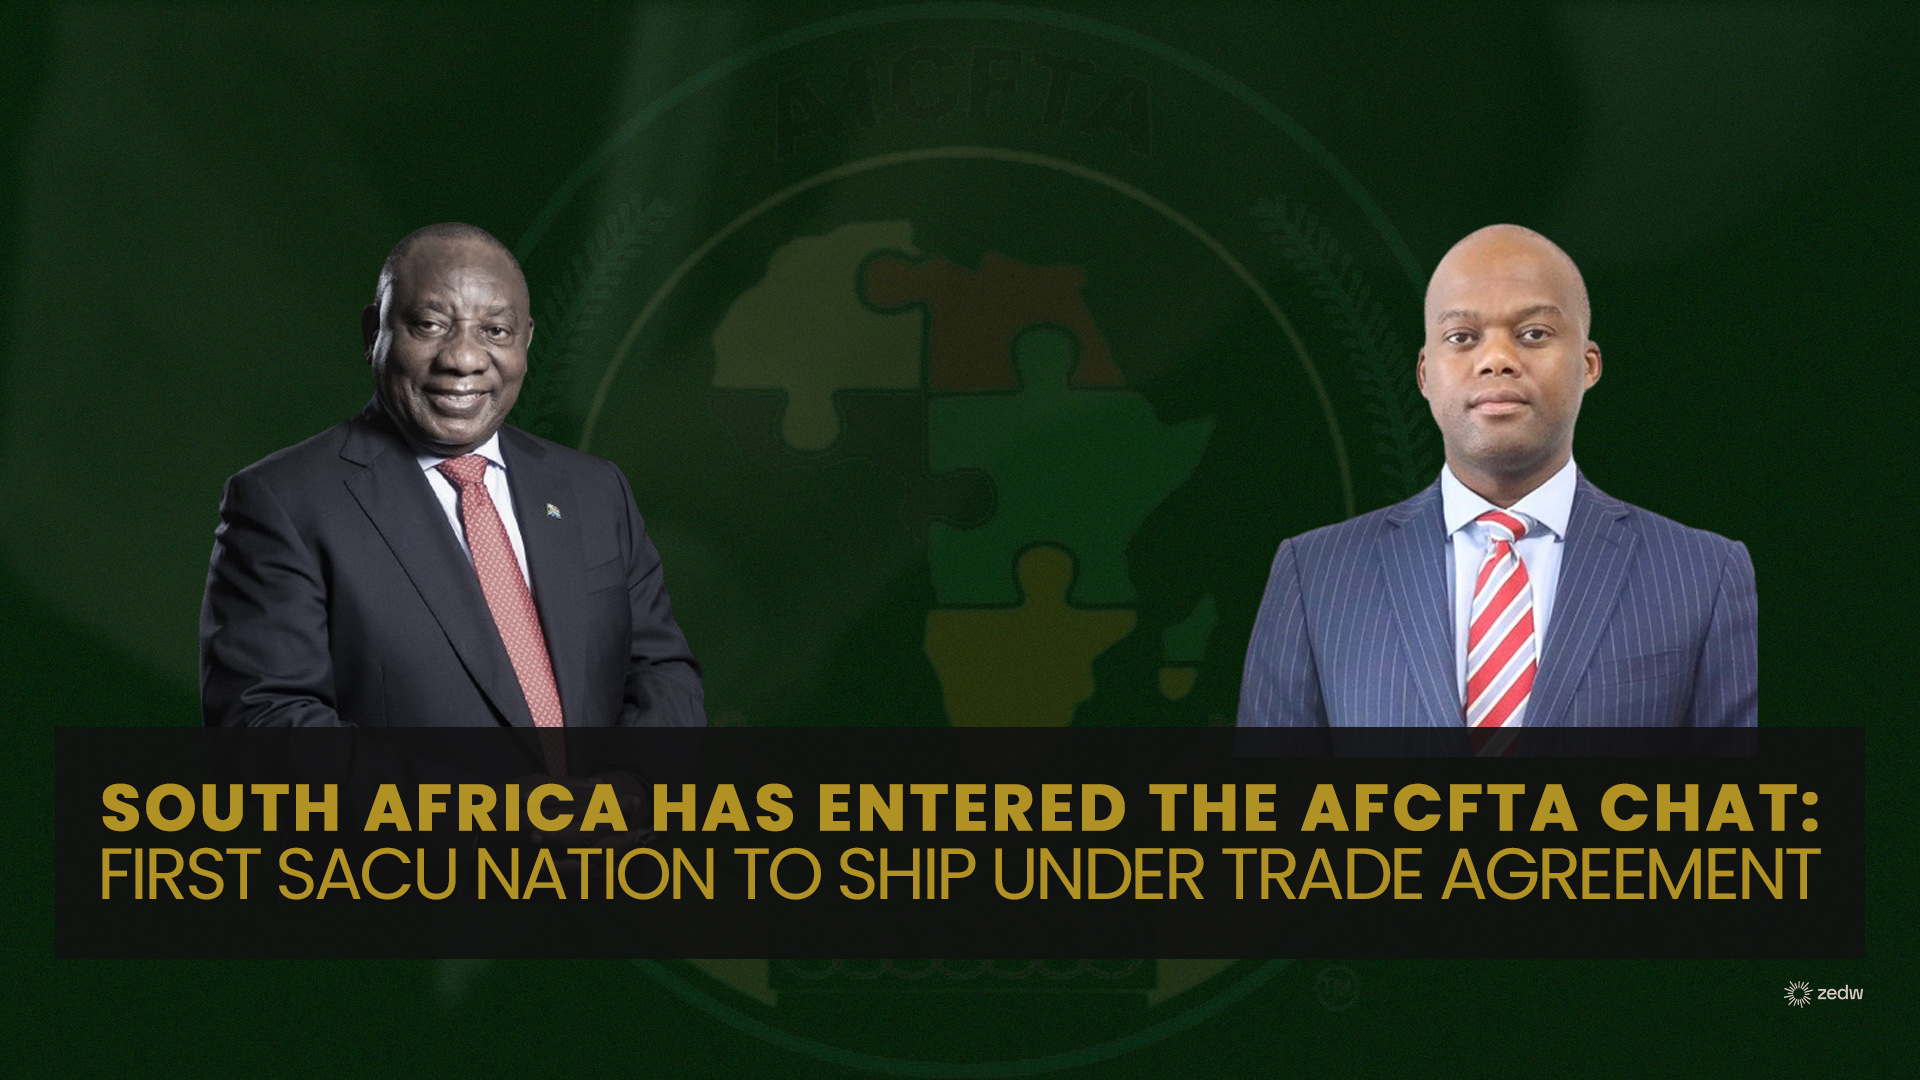 [Bitesized Insights] South Africa has entered the AfCFTA chat: First SACU nation to ship under free trade agreement.